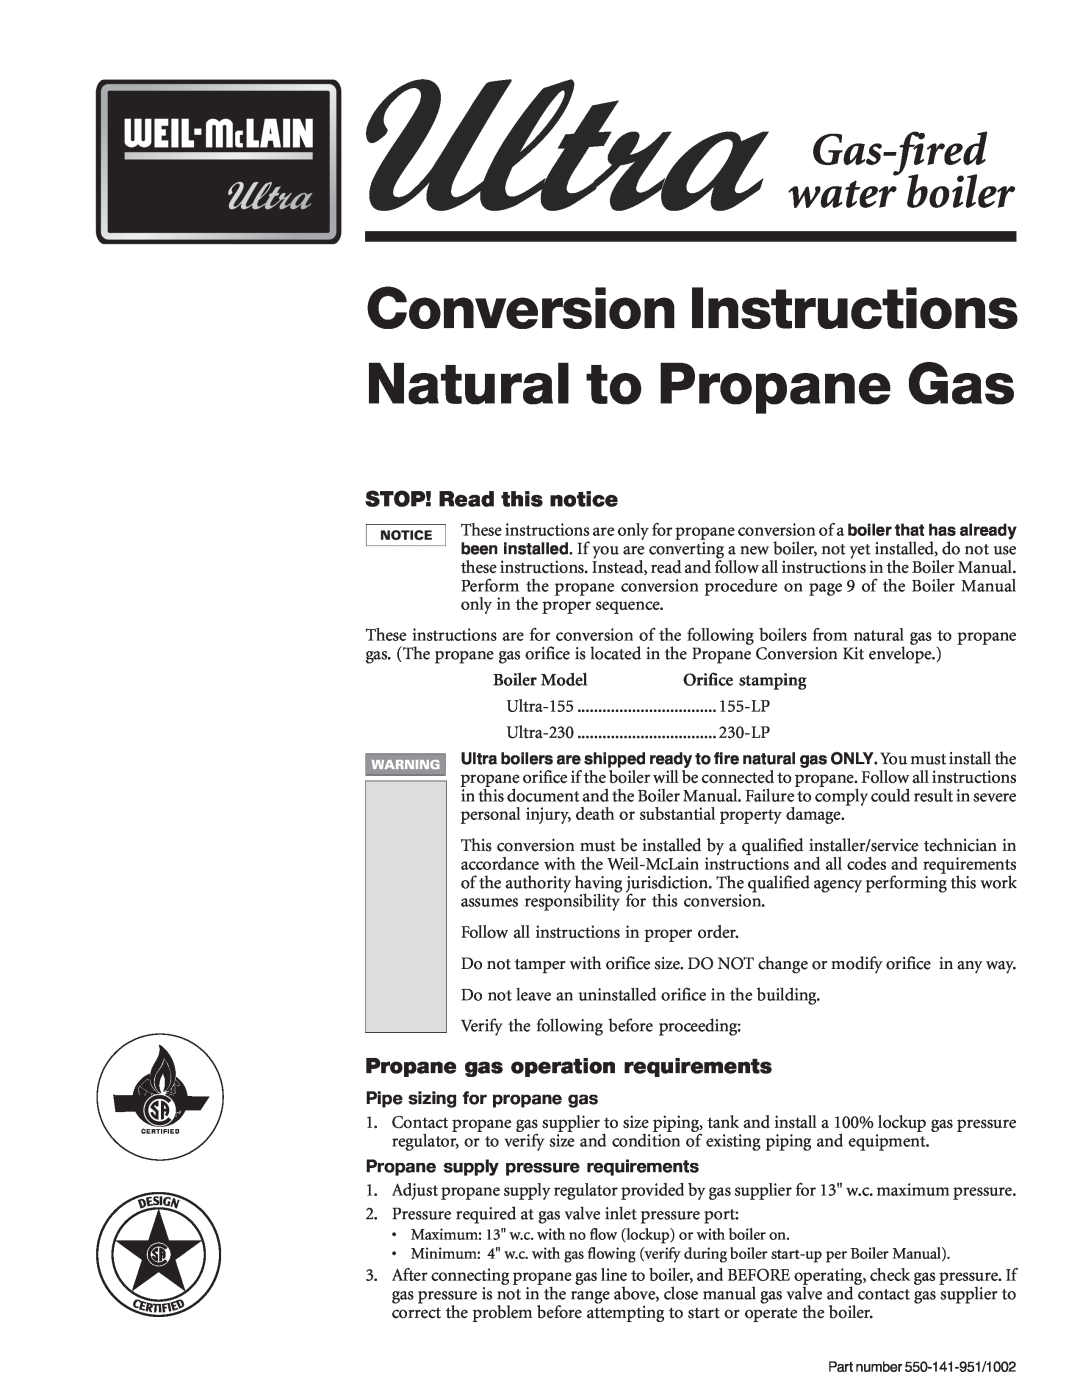 Weil-McLain 550-141-951/1002 manual STOP! Read this notice, Propane gas operation requirements, Gas-firedwater boiler 